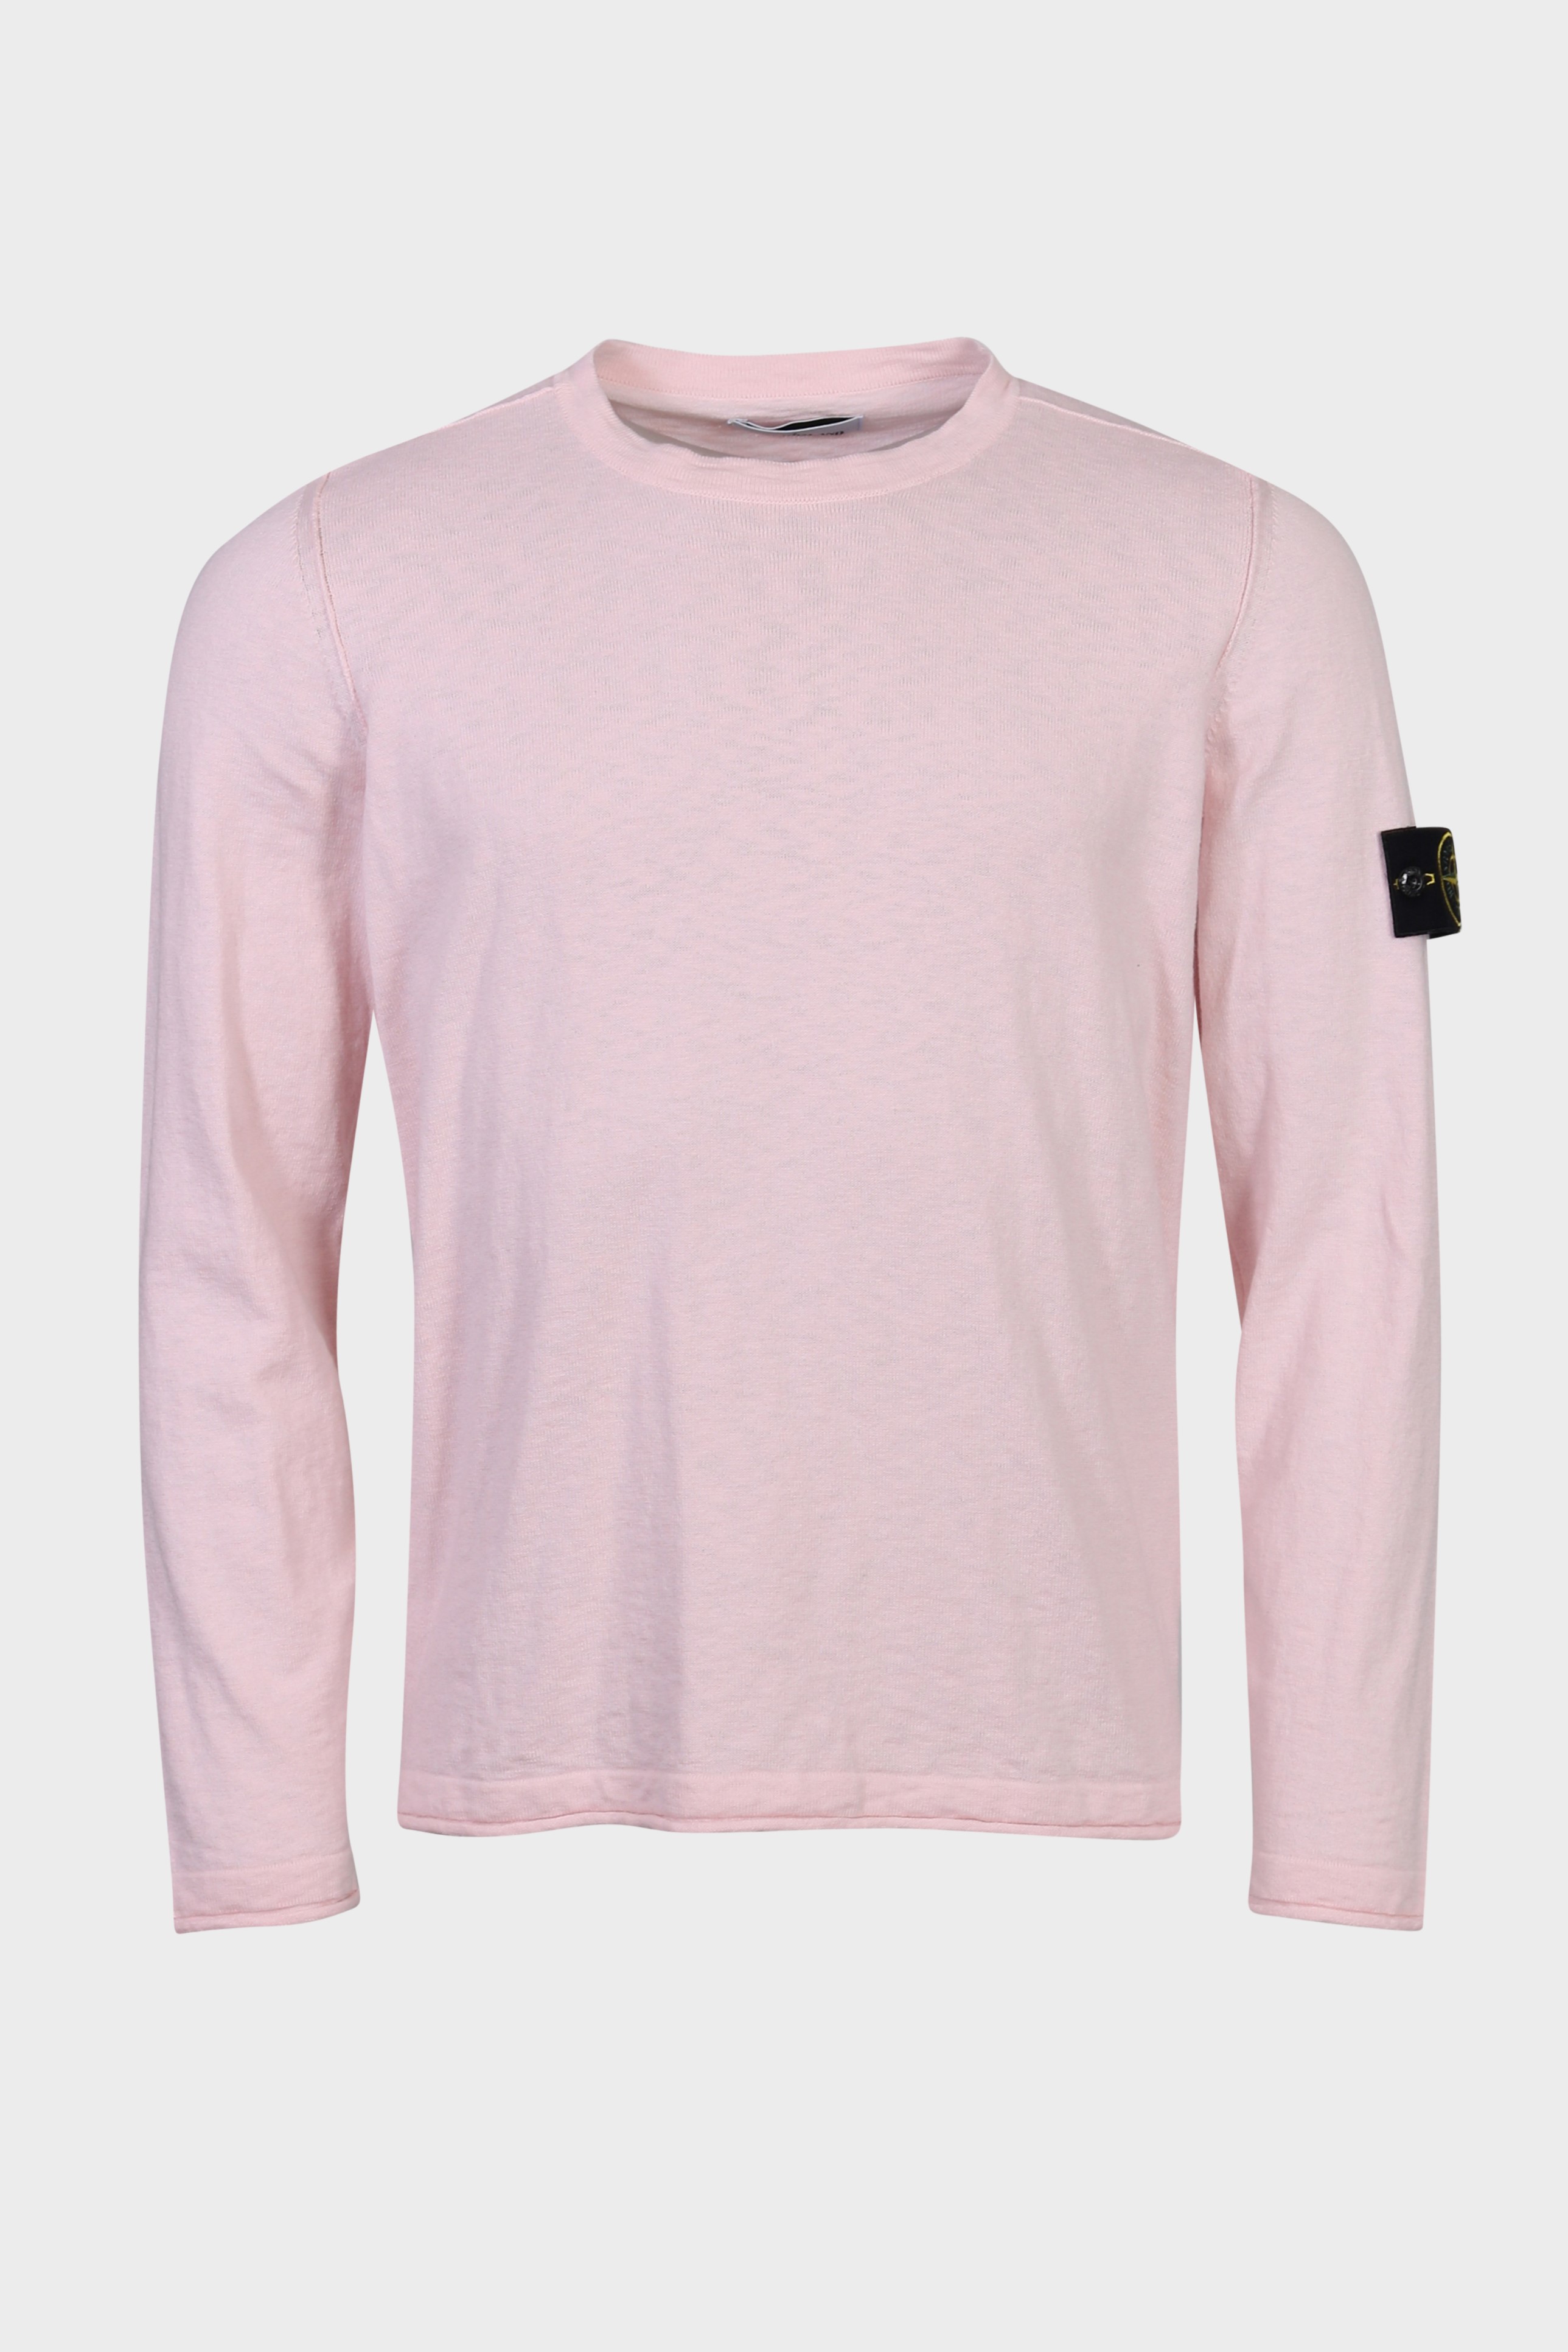 STONE ISLAND Summer Knit Pullover in Light Pink L